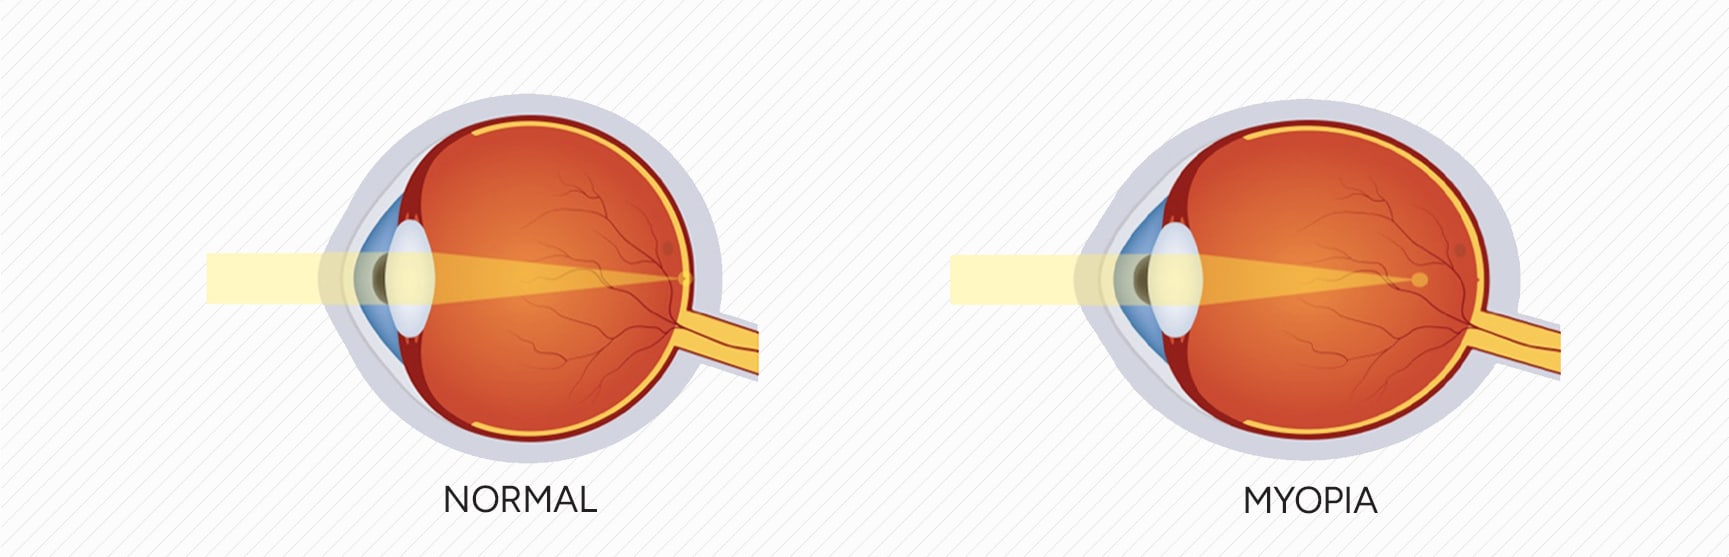 Diagram comparing the way light focuses in a normal eye versus a myopic one.